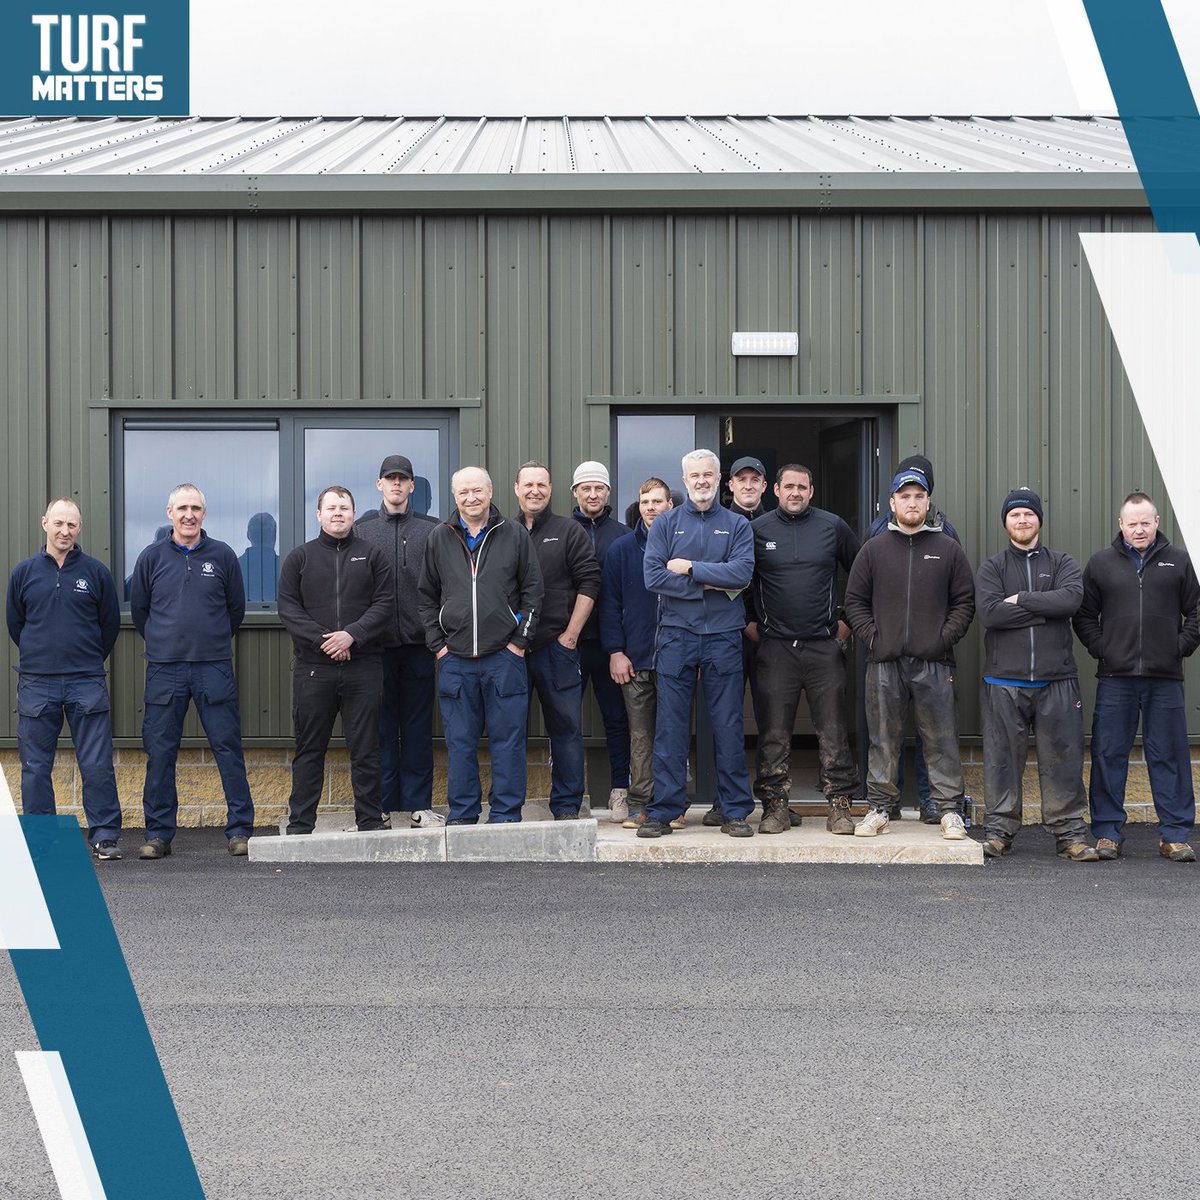 #TurfNews Royal Troon Golf Club has upgraded its greenkeepers compound, incorporating state-of-the-art locker rooms, ahead of this summer’s 152nd Open. Read more 👉 turfmatters.co.uk/royal-troon-gr…